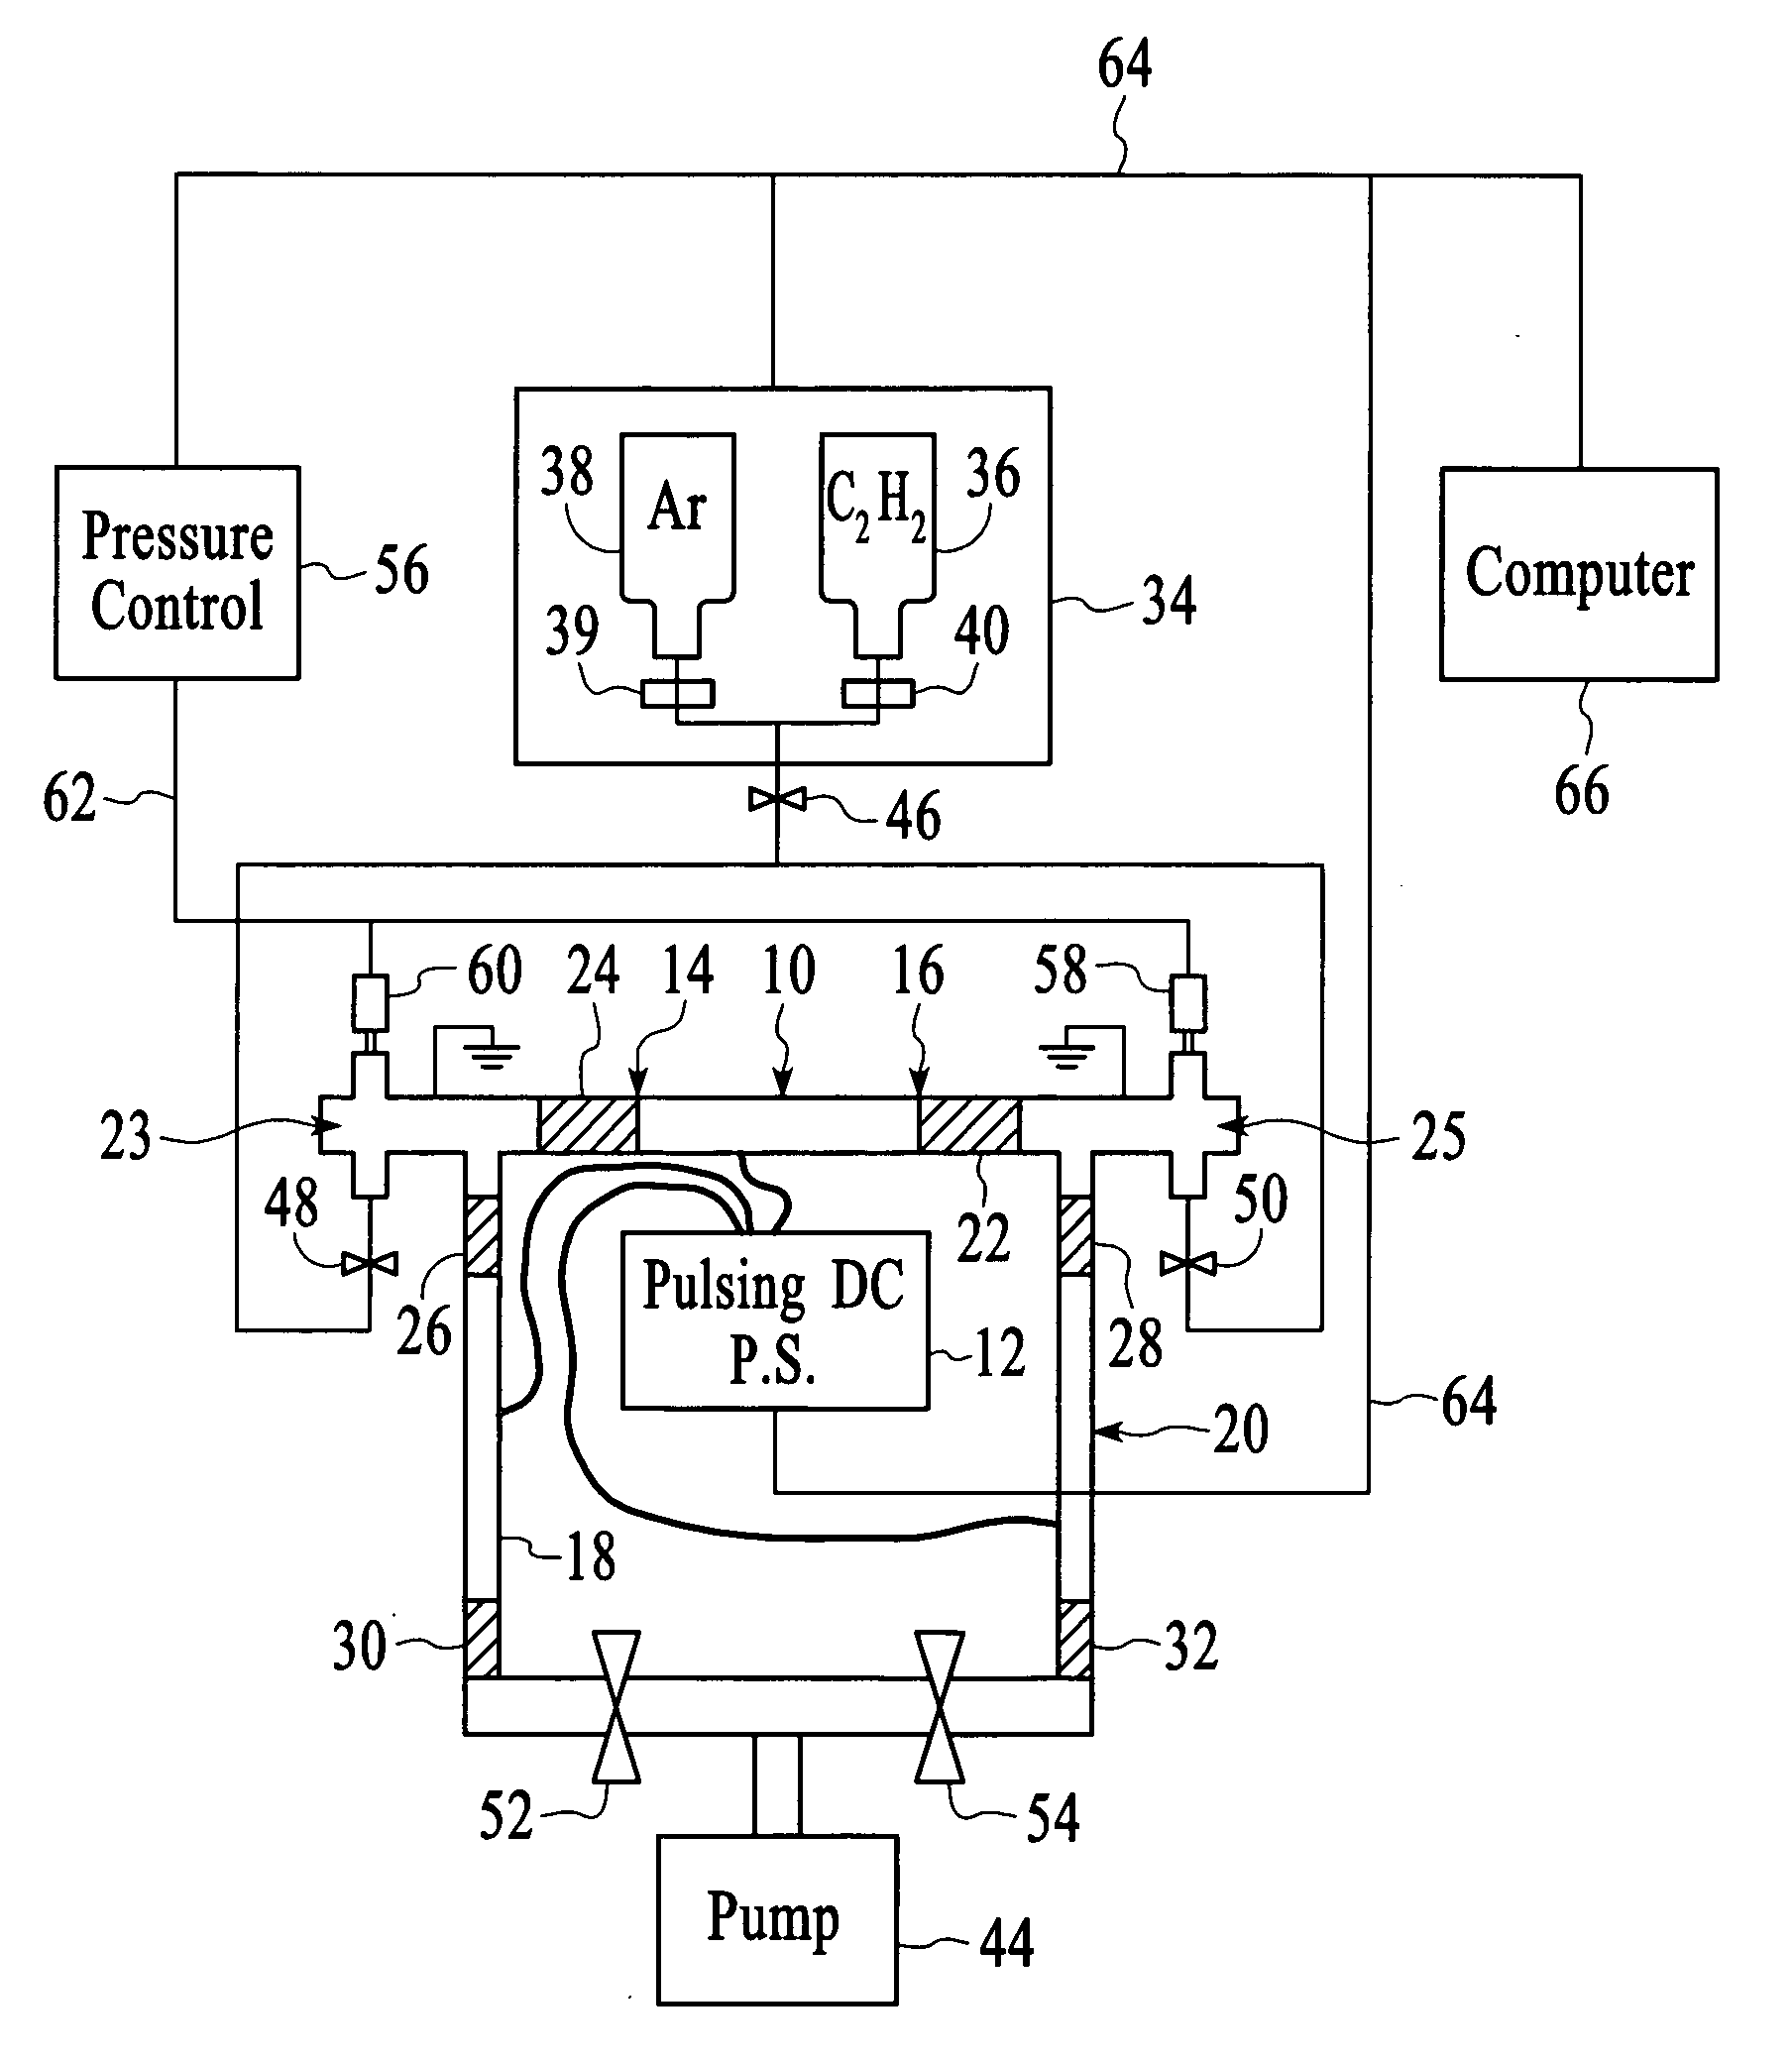 Method and system for coating internal surfaces using reverse-flow cycling